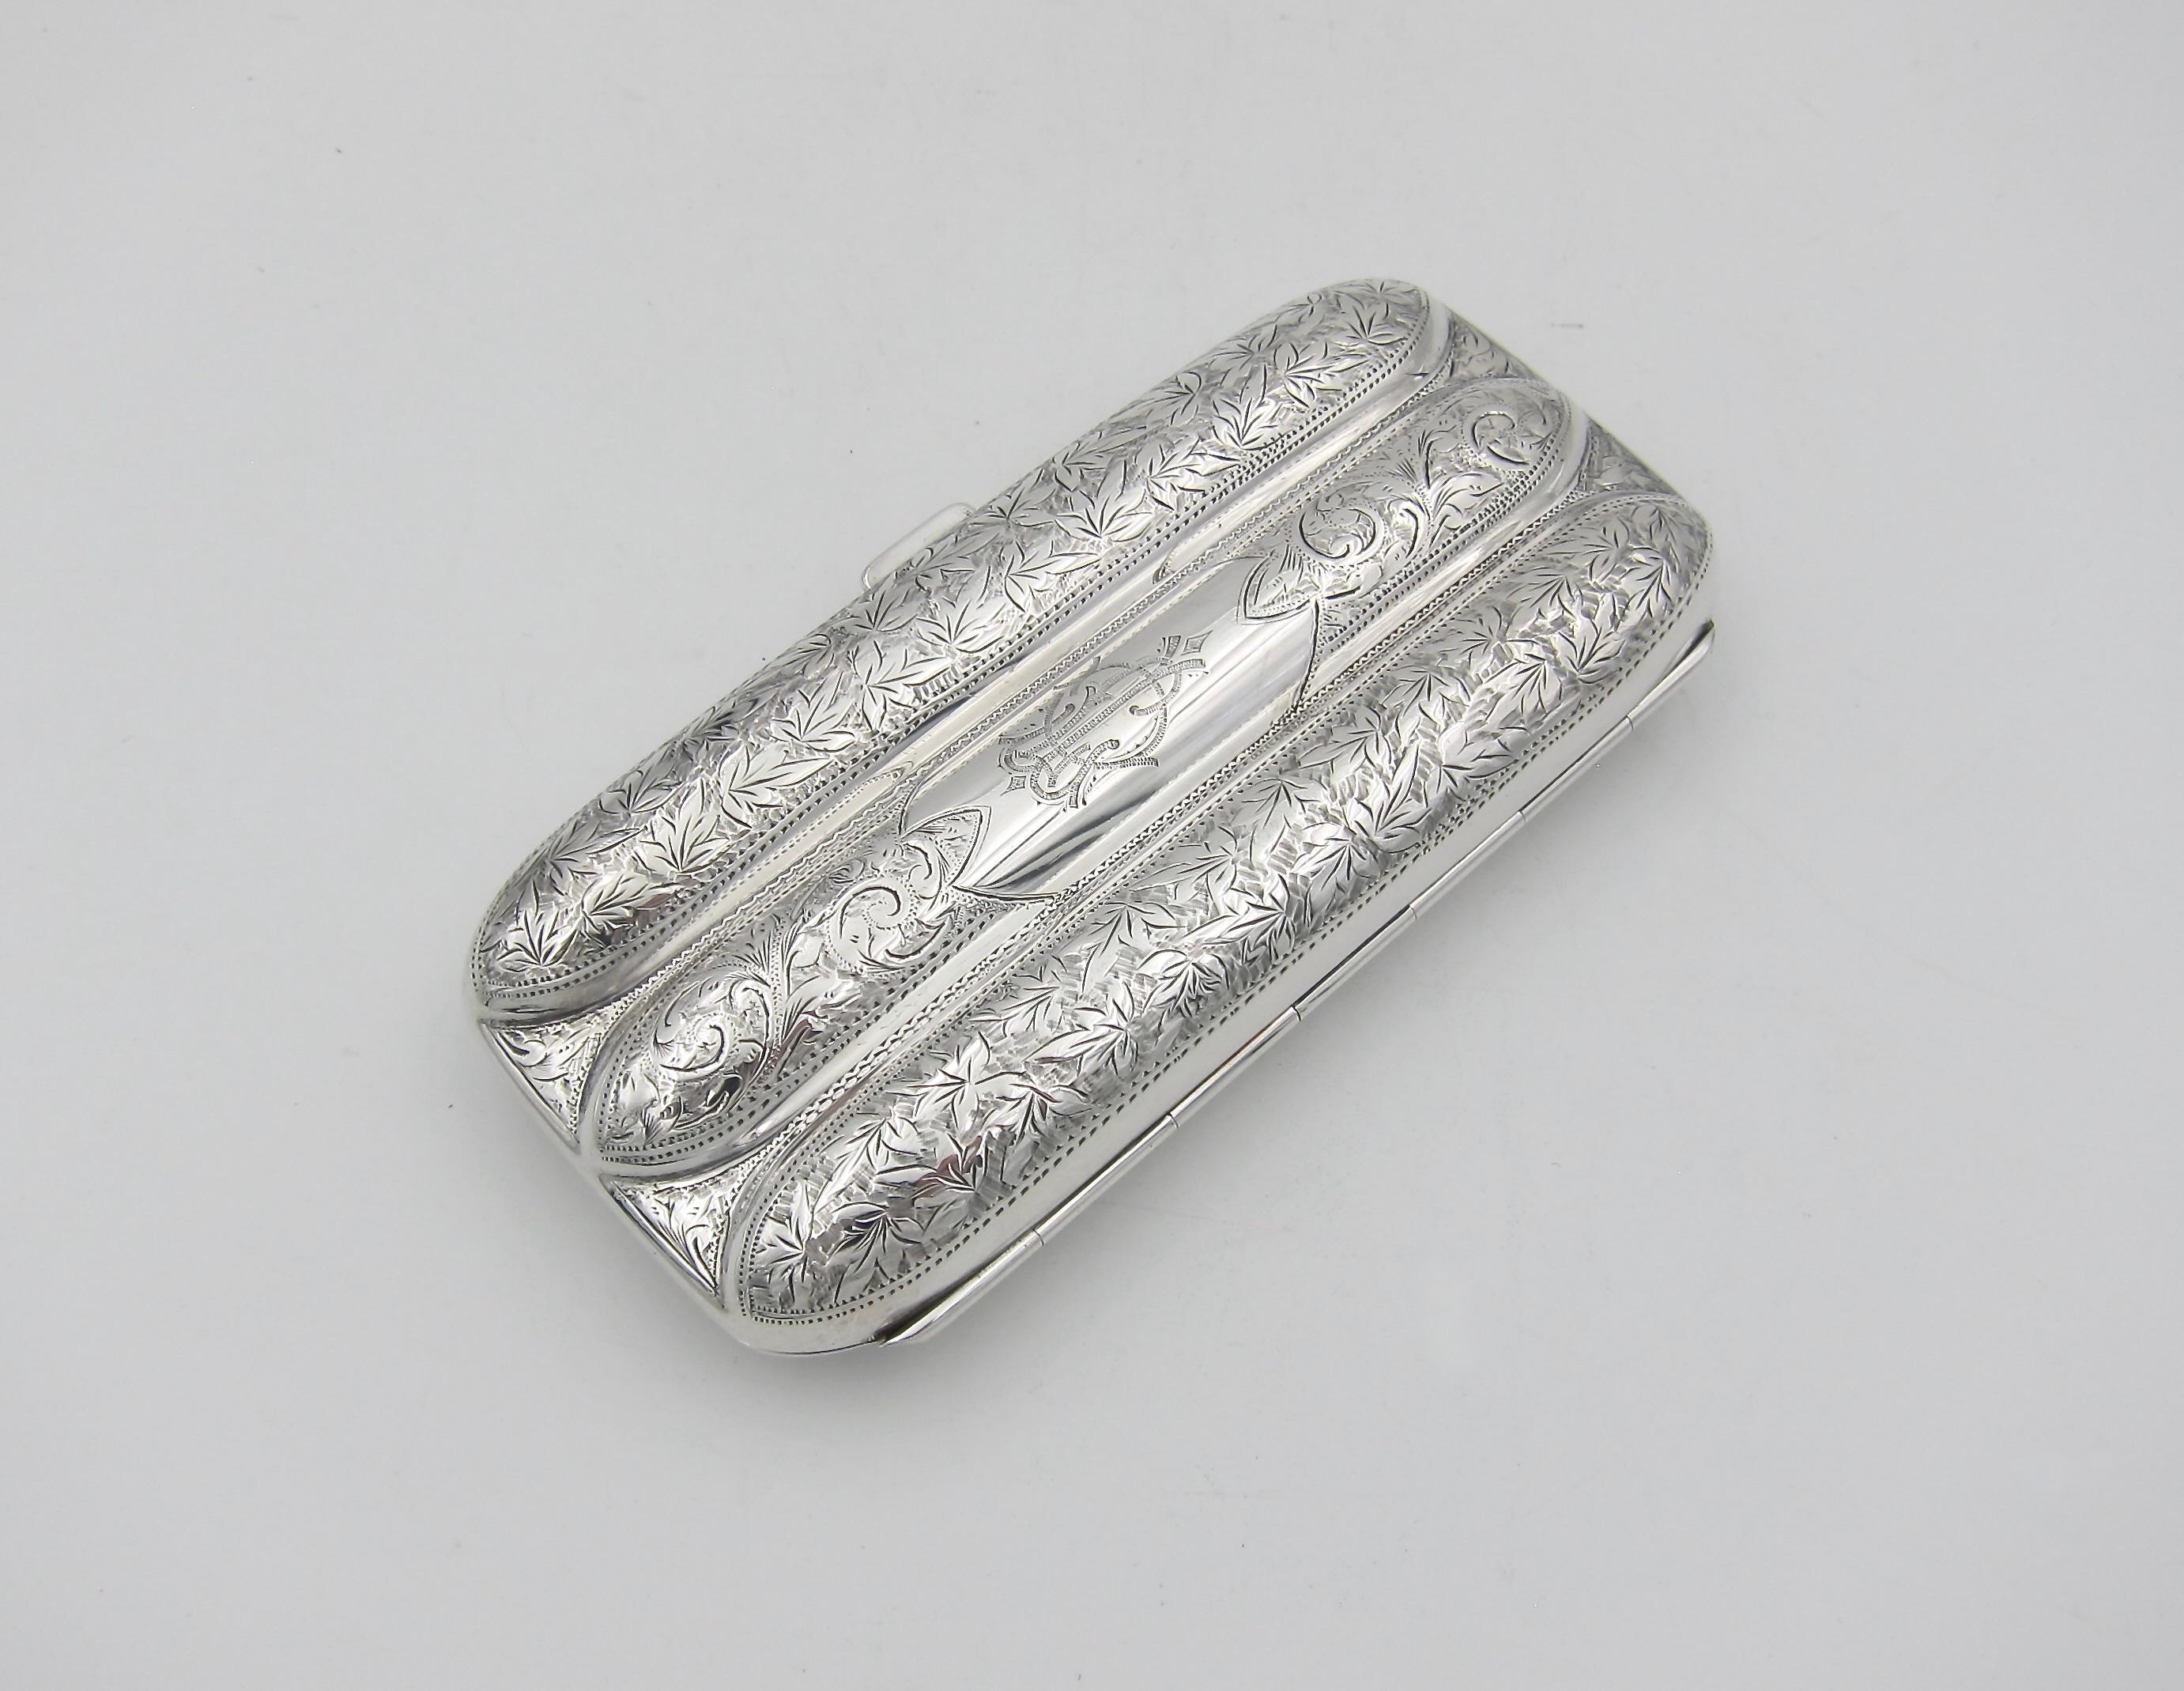 English Antique Edwardian Three Tube Sterling Silver Cigar Case From William Aitken 1901